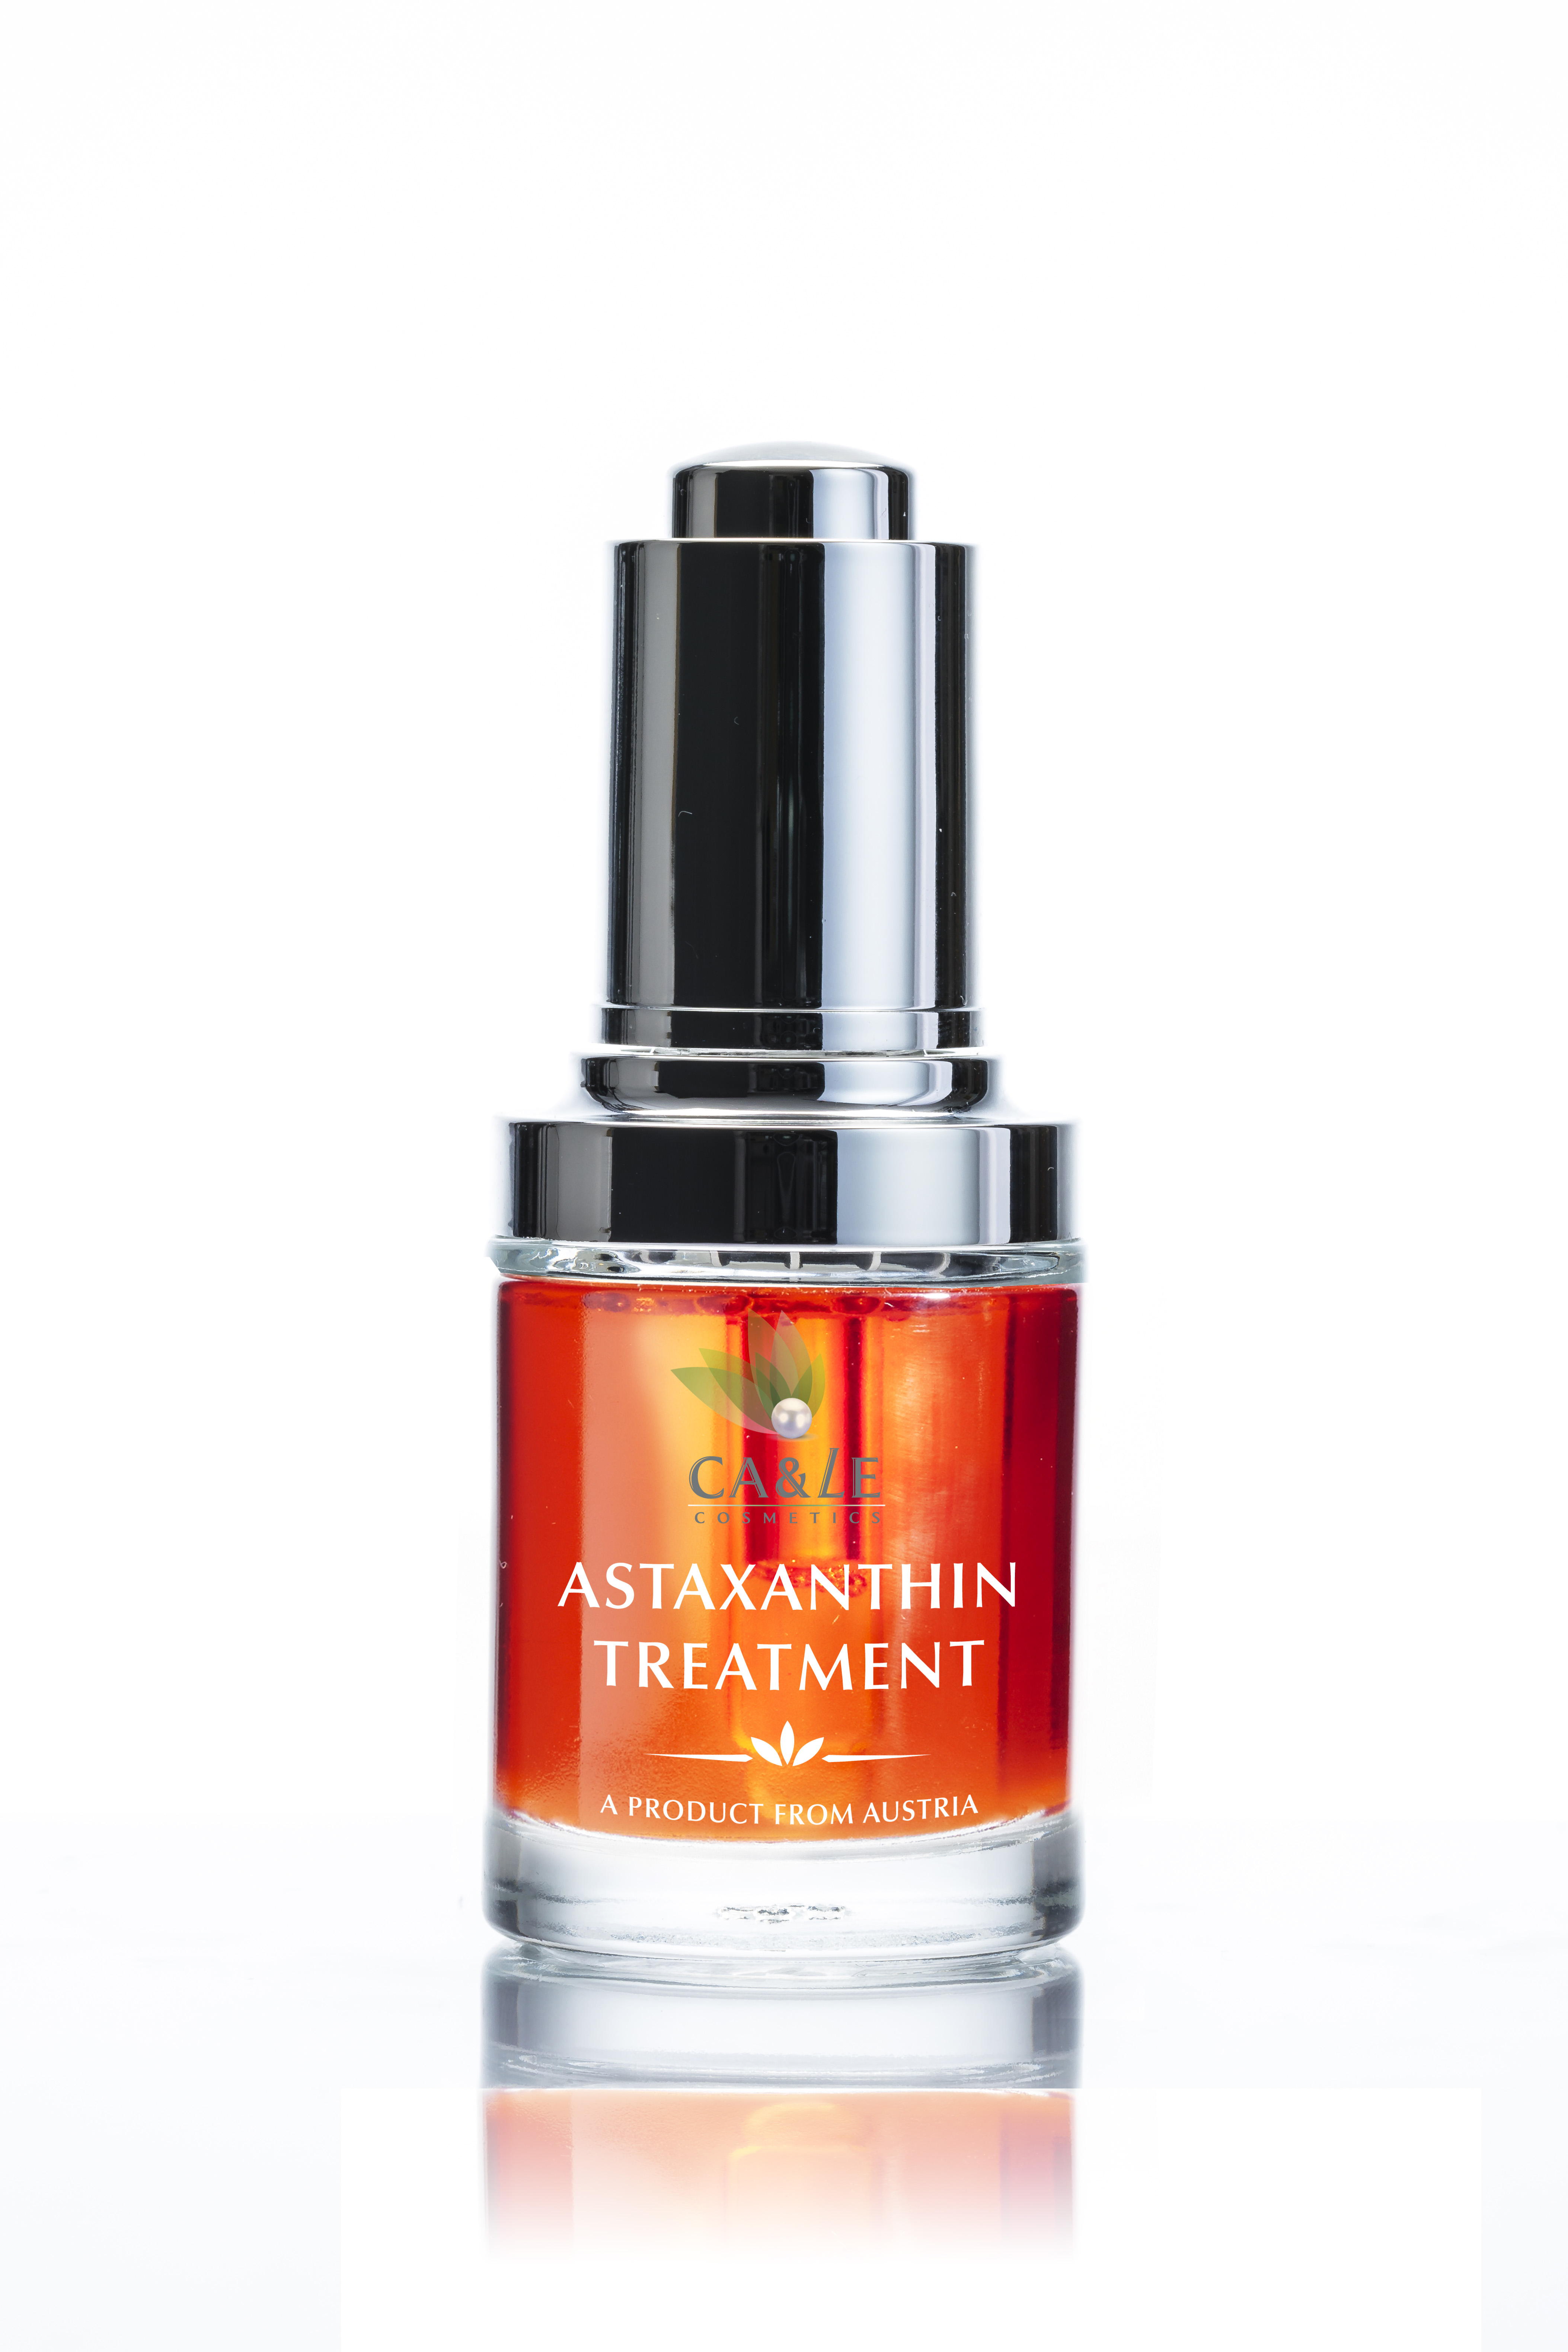 18. Ca & Le Astaxanthin: effectively counteracts the process of aging and stops wrinkle formation